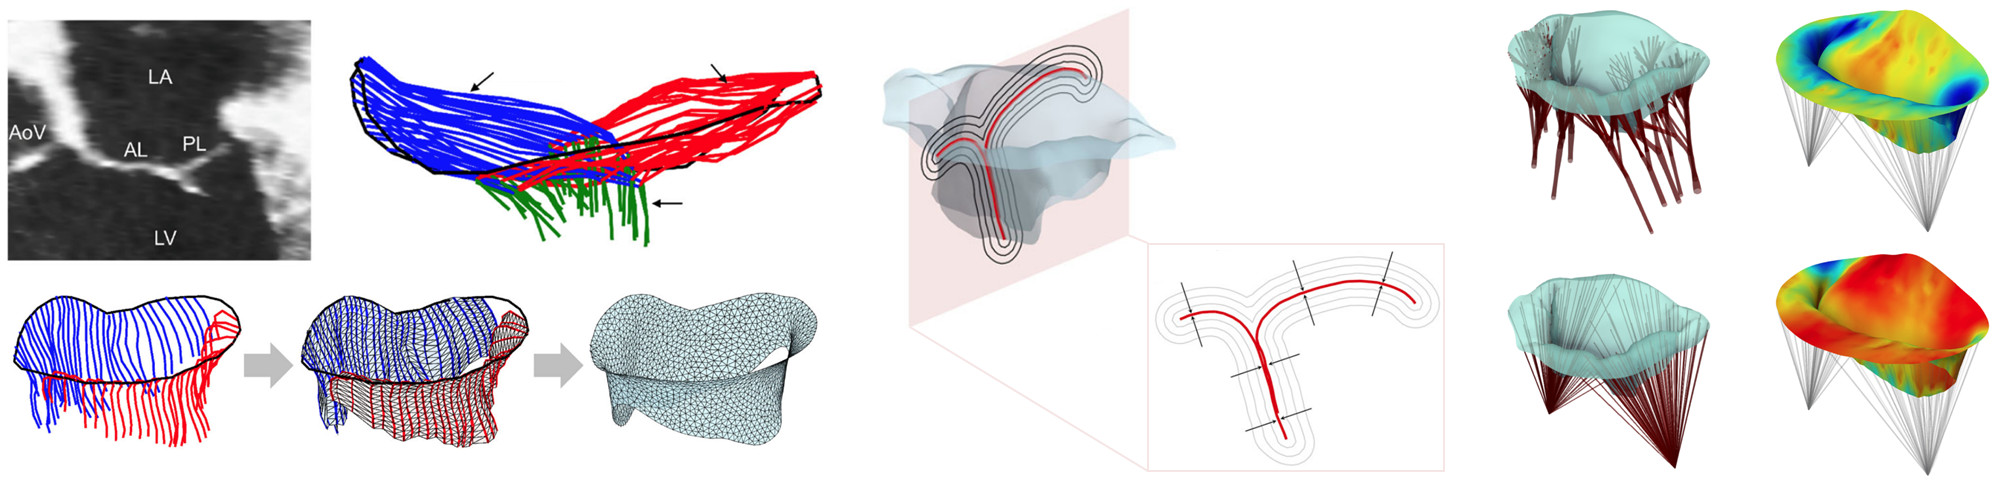 Patient-specific simulations of mitral valve function